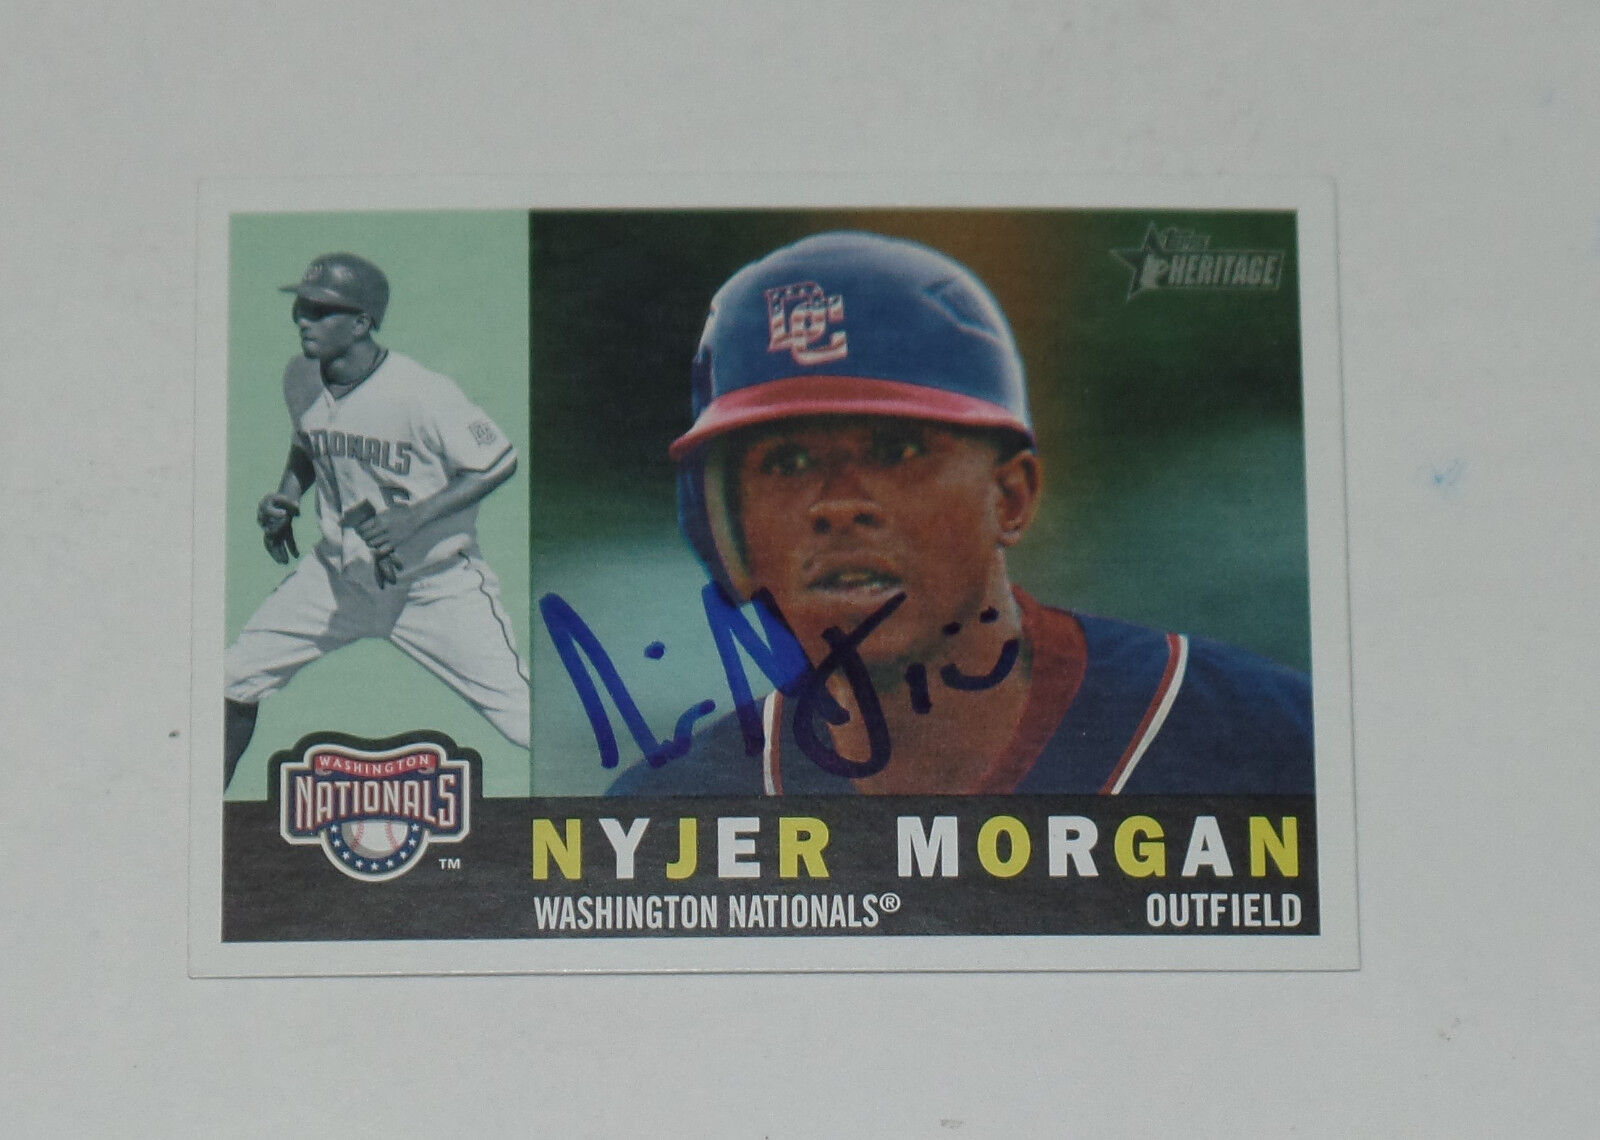 NYJER MORGAN SIGNED AUTO\'D 2009 TOPPS HERITAGE CARD #653 NATIONALS PIRATES